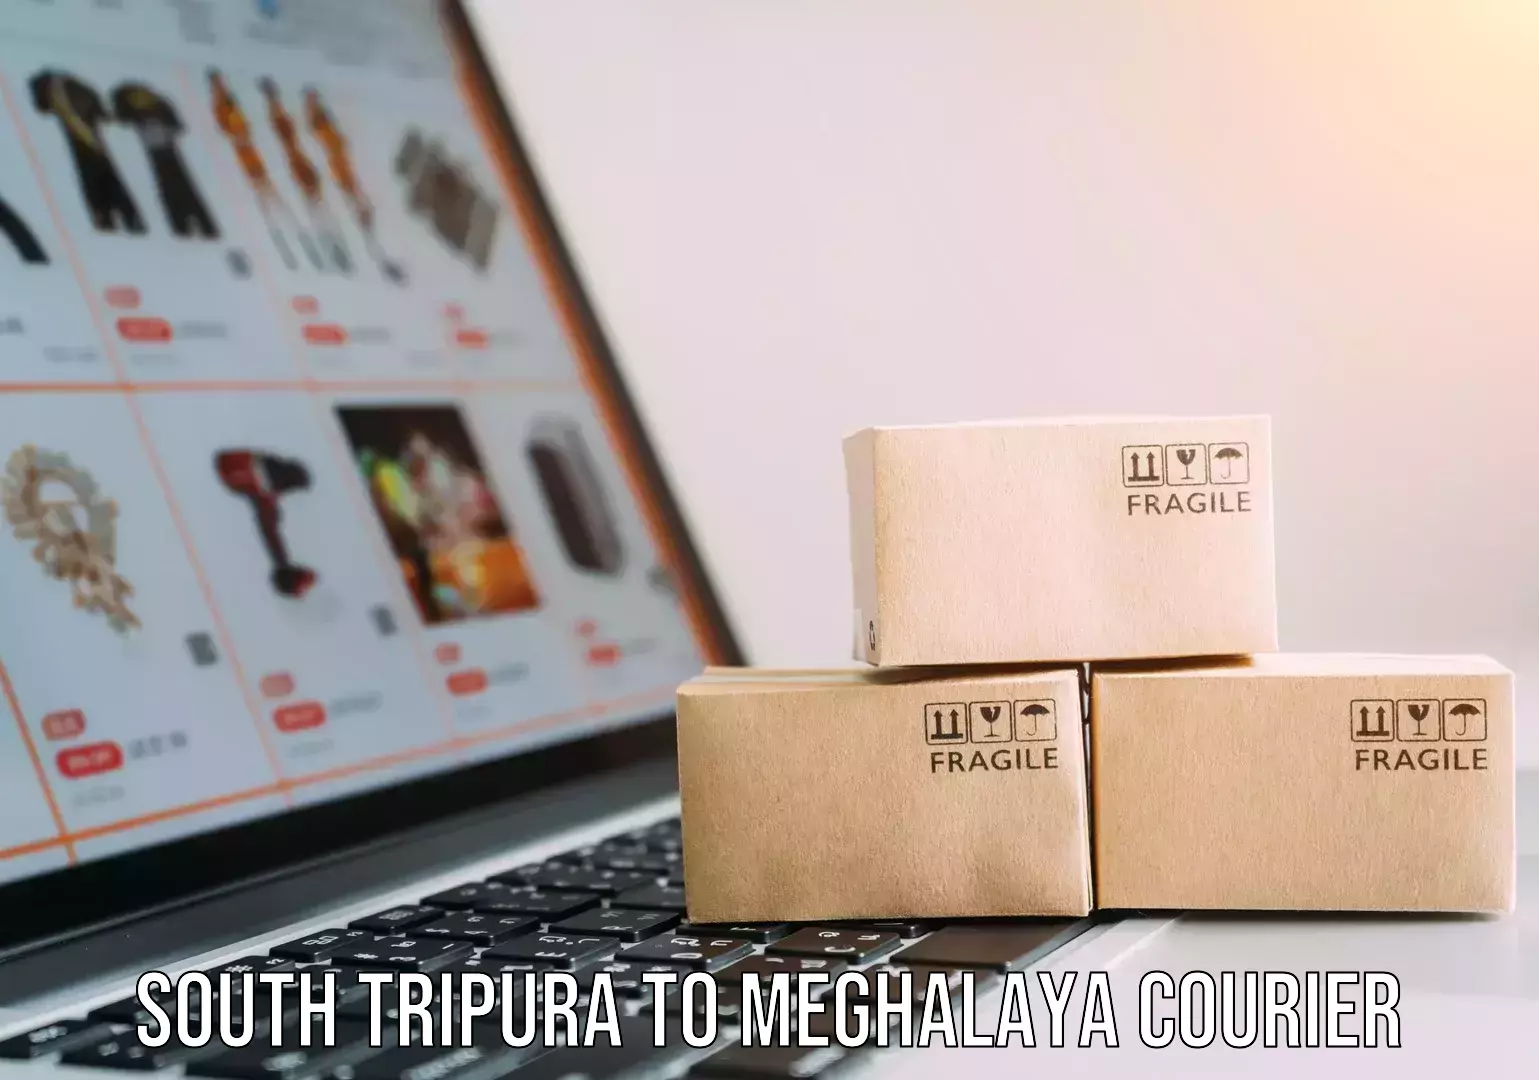 Fast delivery service South Tripura to Meghalaya